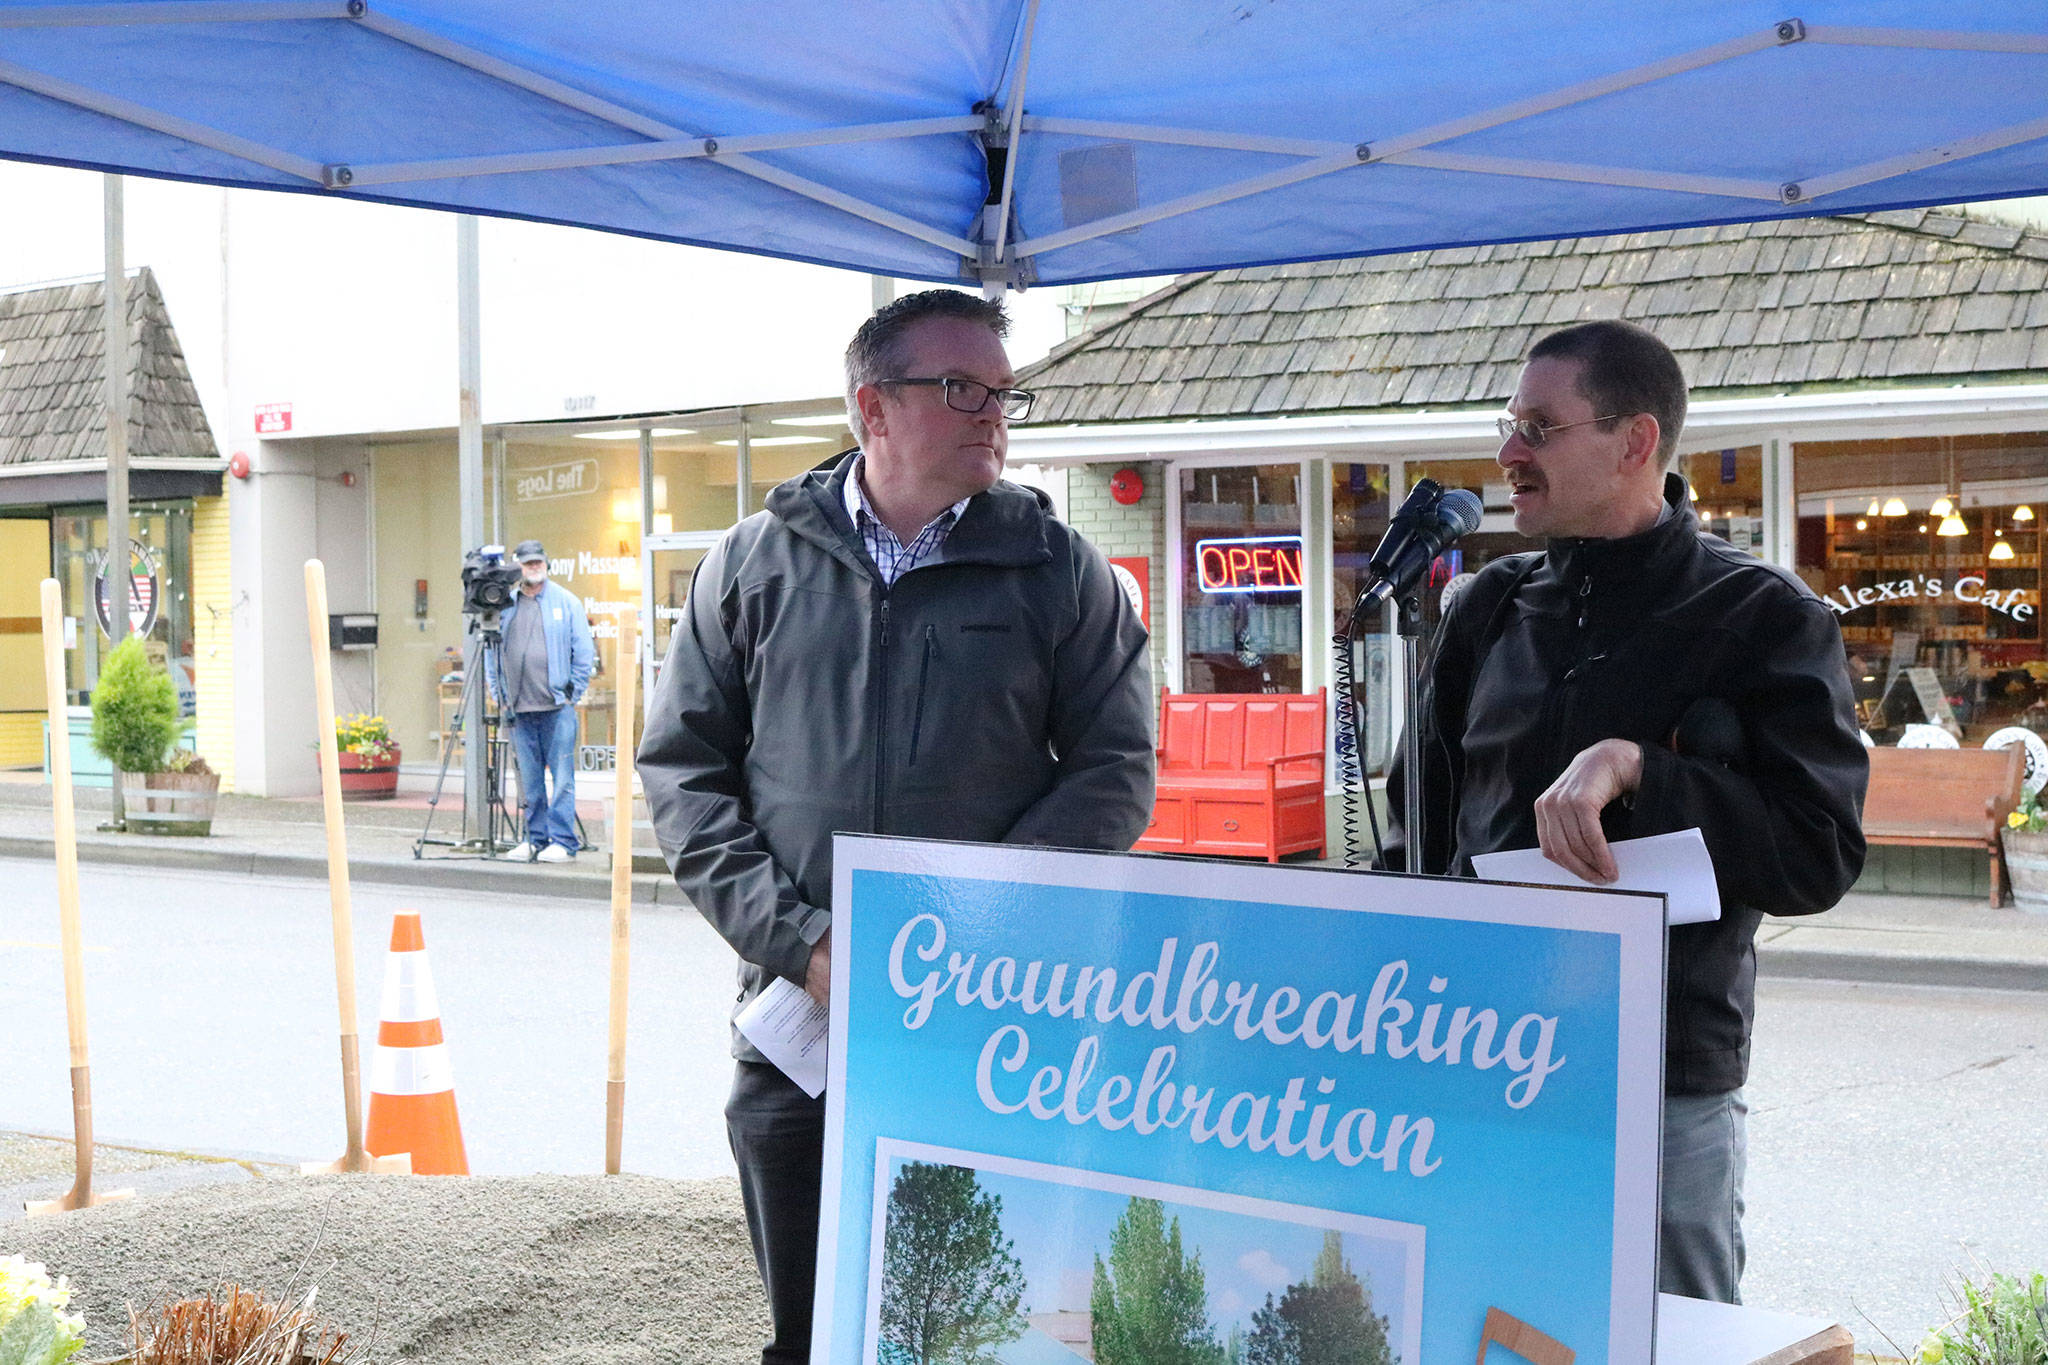 Bothell Mayor Andy Rheaume looks on as Transportation Improvement Board Engineer Greg Armstrong speaks during the groundbreaking ceremony for the Main Street Enhancement Project on March 28. CATHERINE KRUMMEY / Bothell Reporter